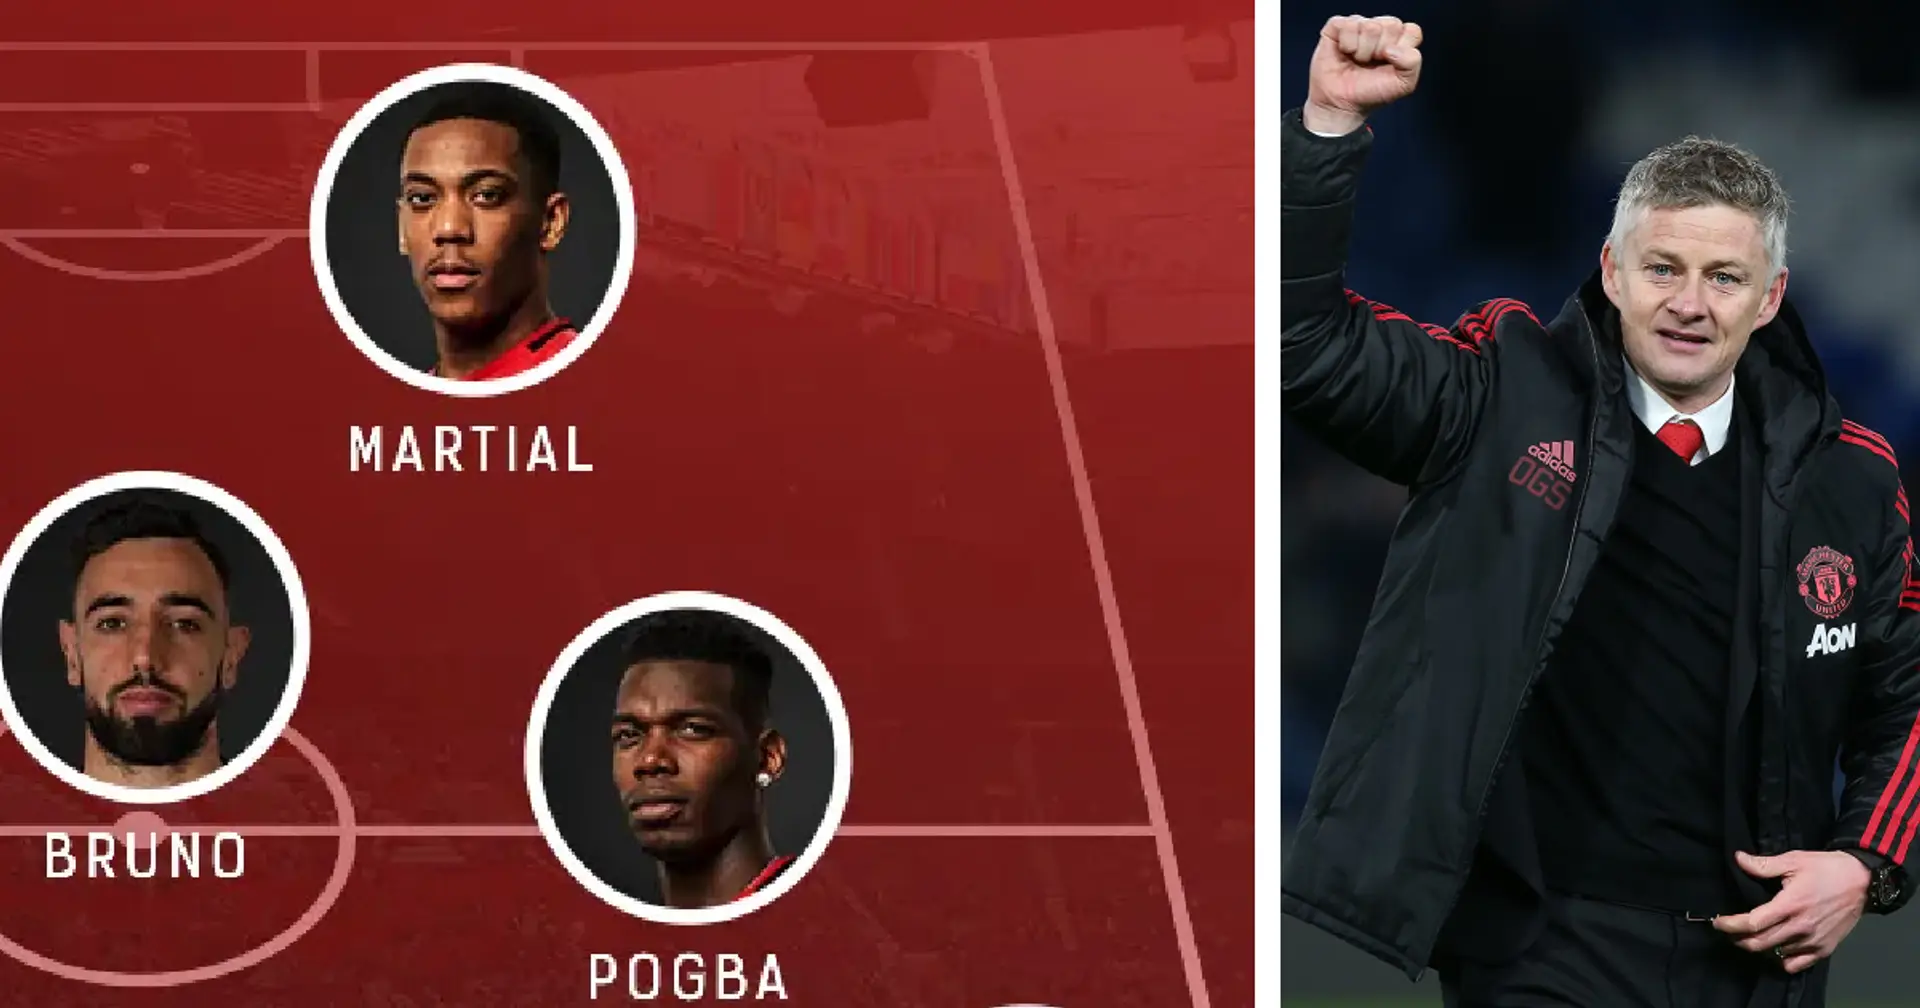 'A tactical performance is what we need': United fans select ultimate XI to face PSG